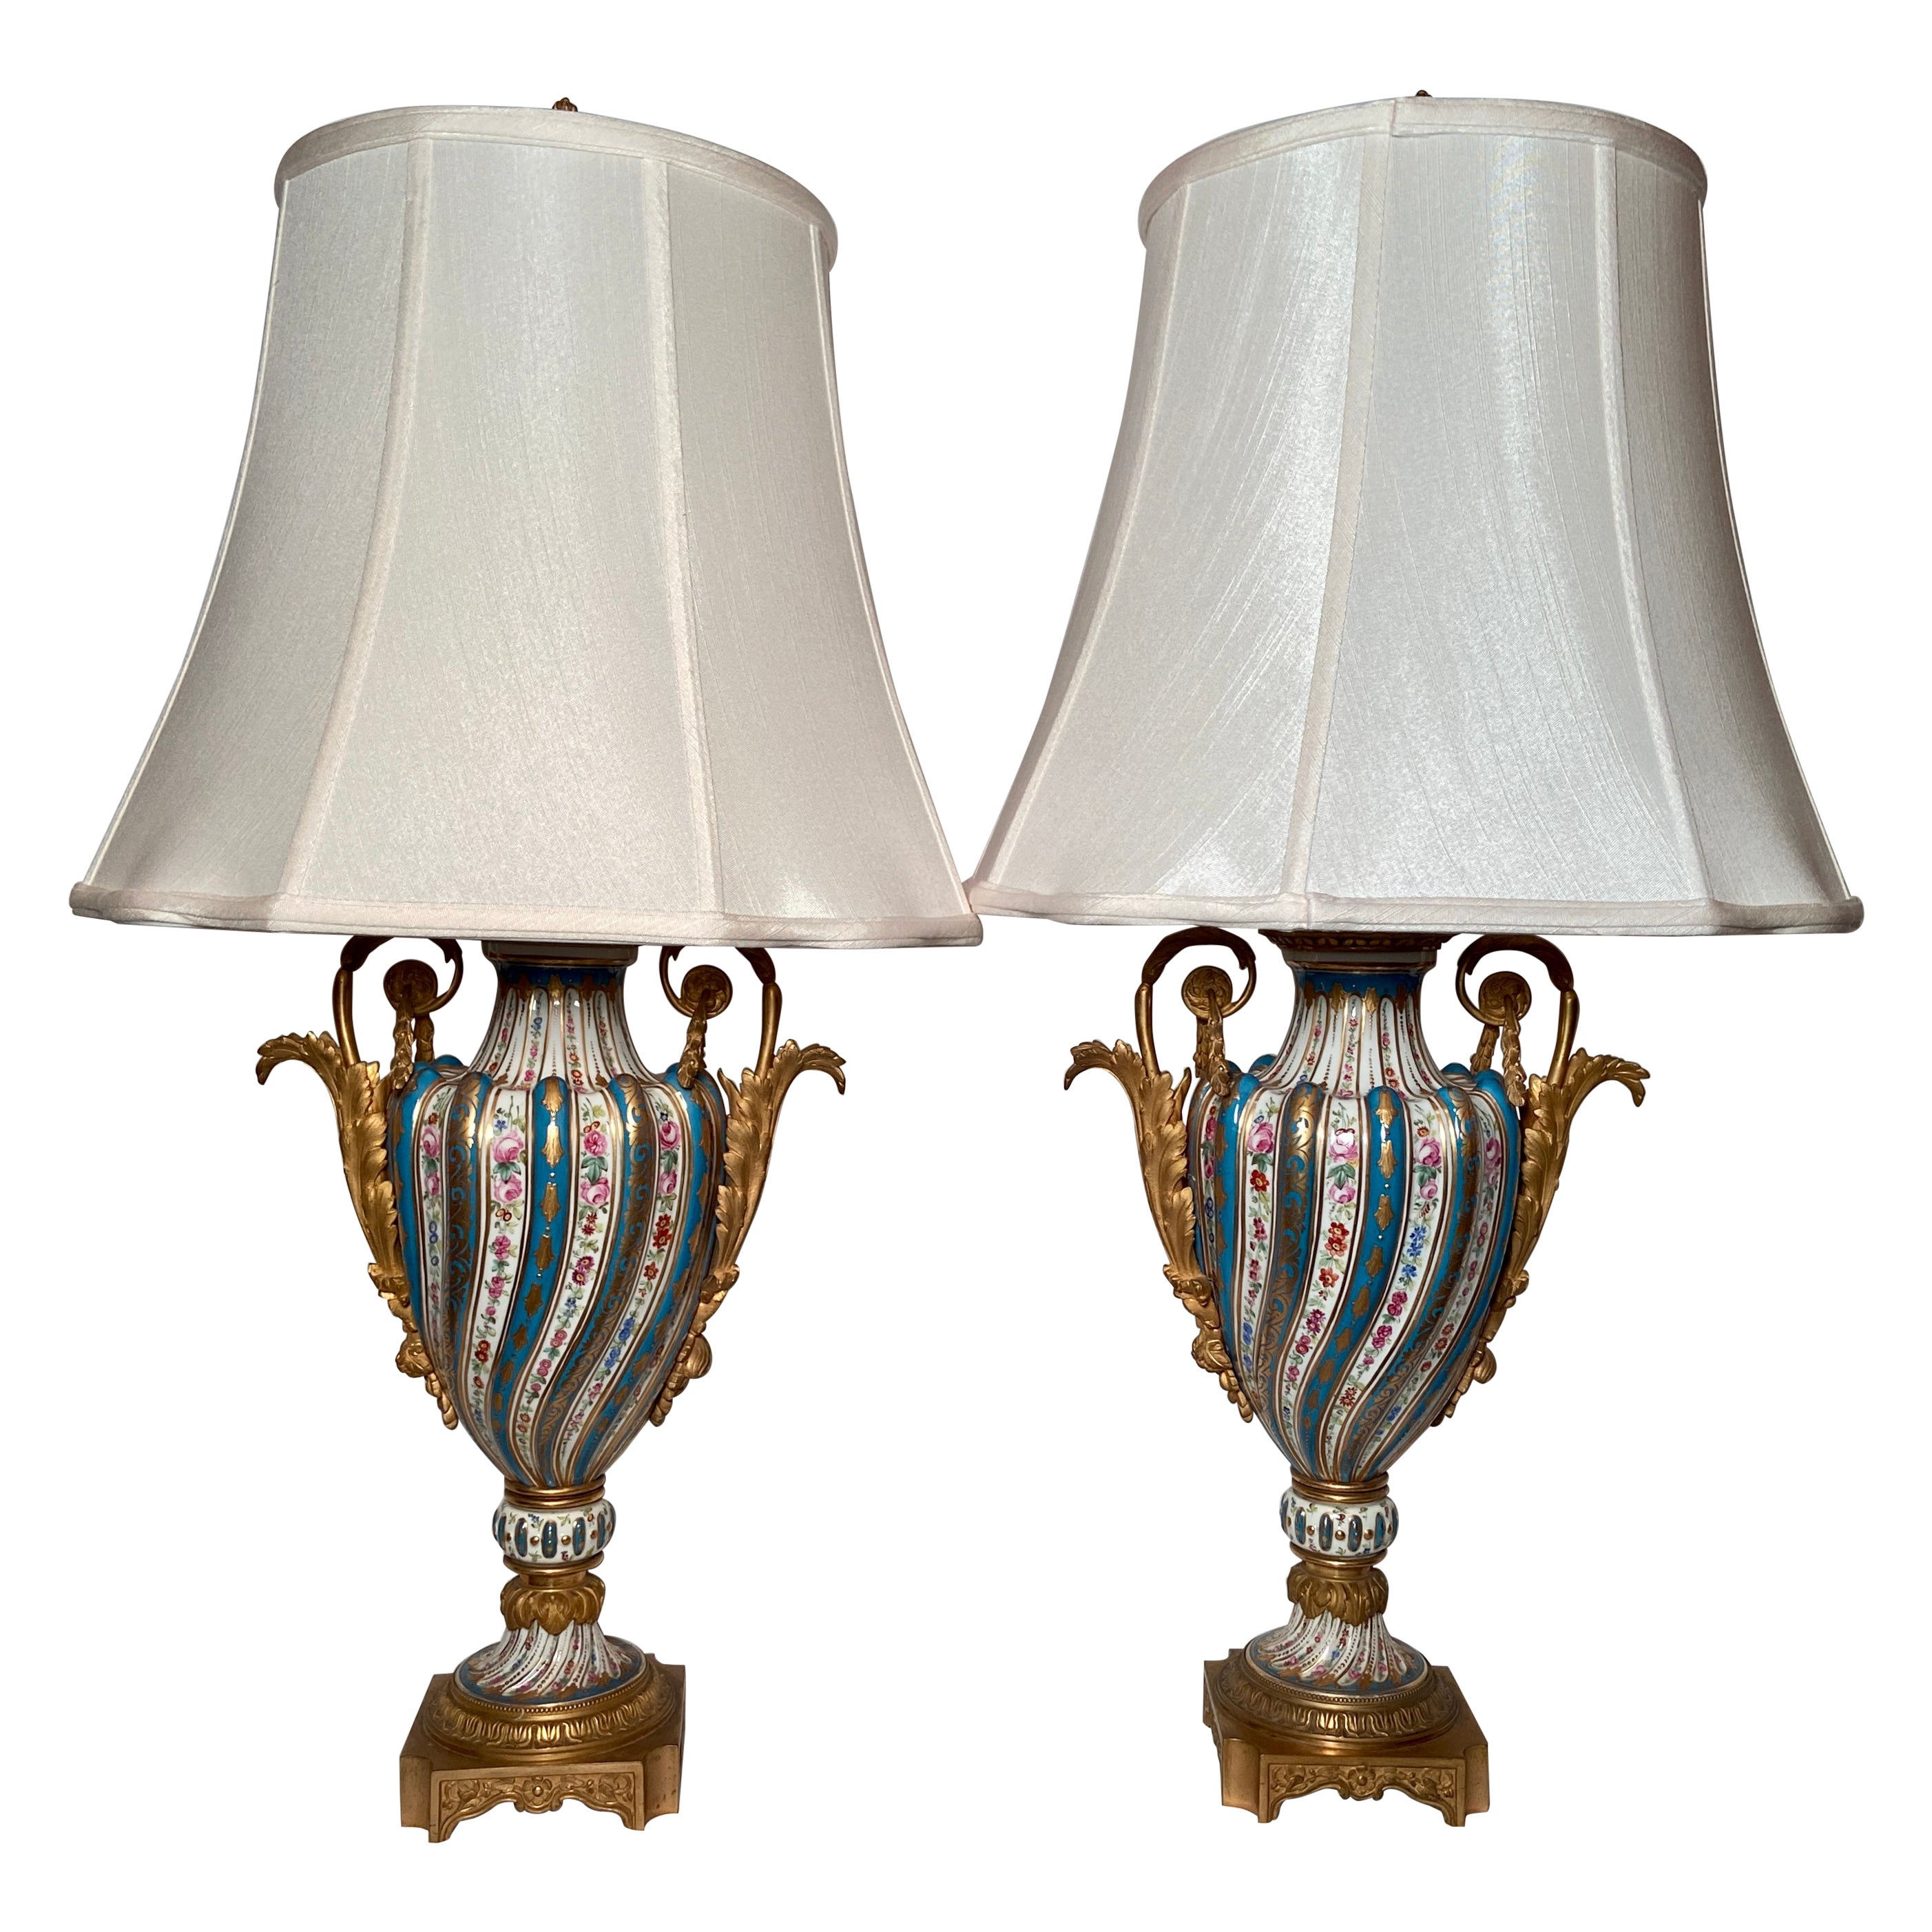 Pair Antique French Ormolu Mounted Sevres Porcelain Lamps, circa 1860-1870